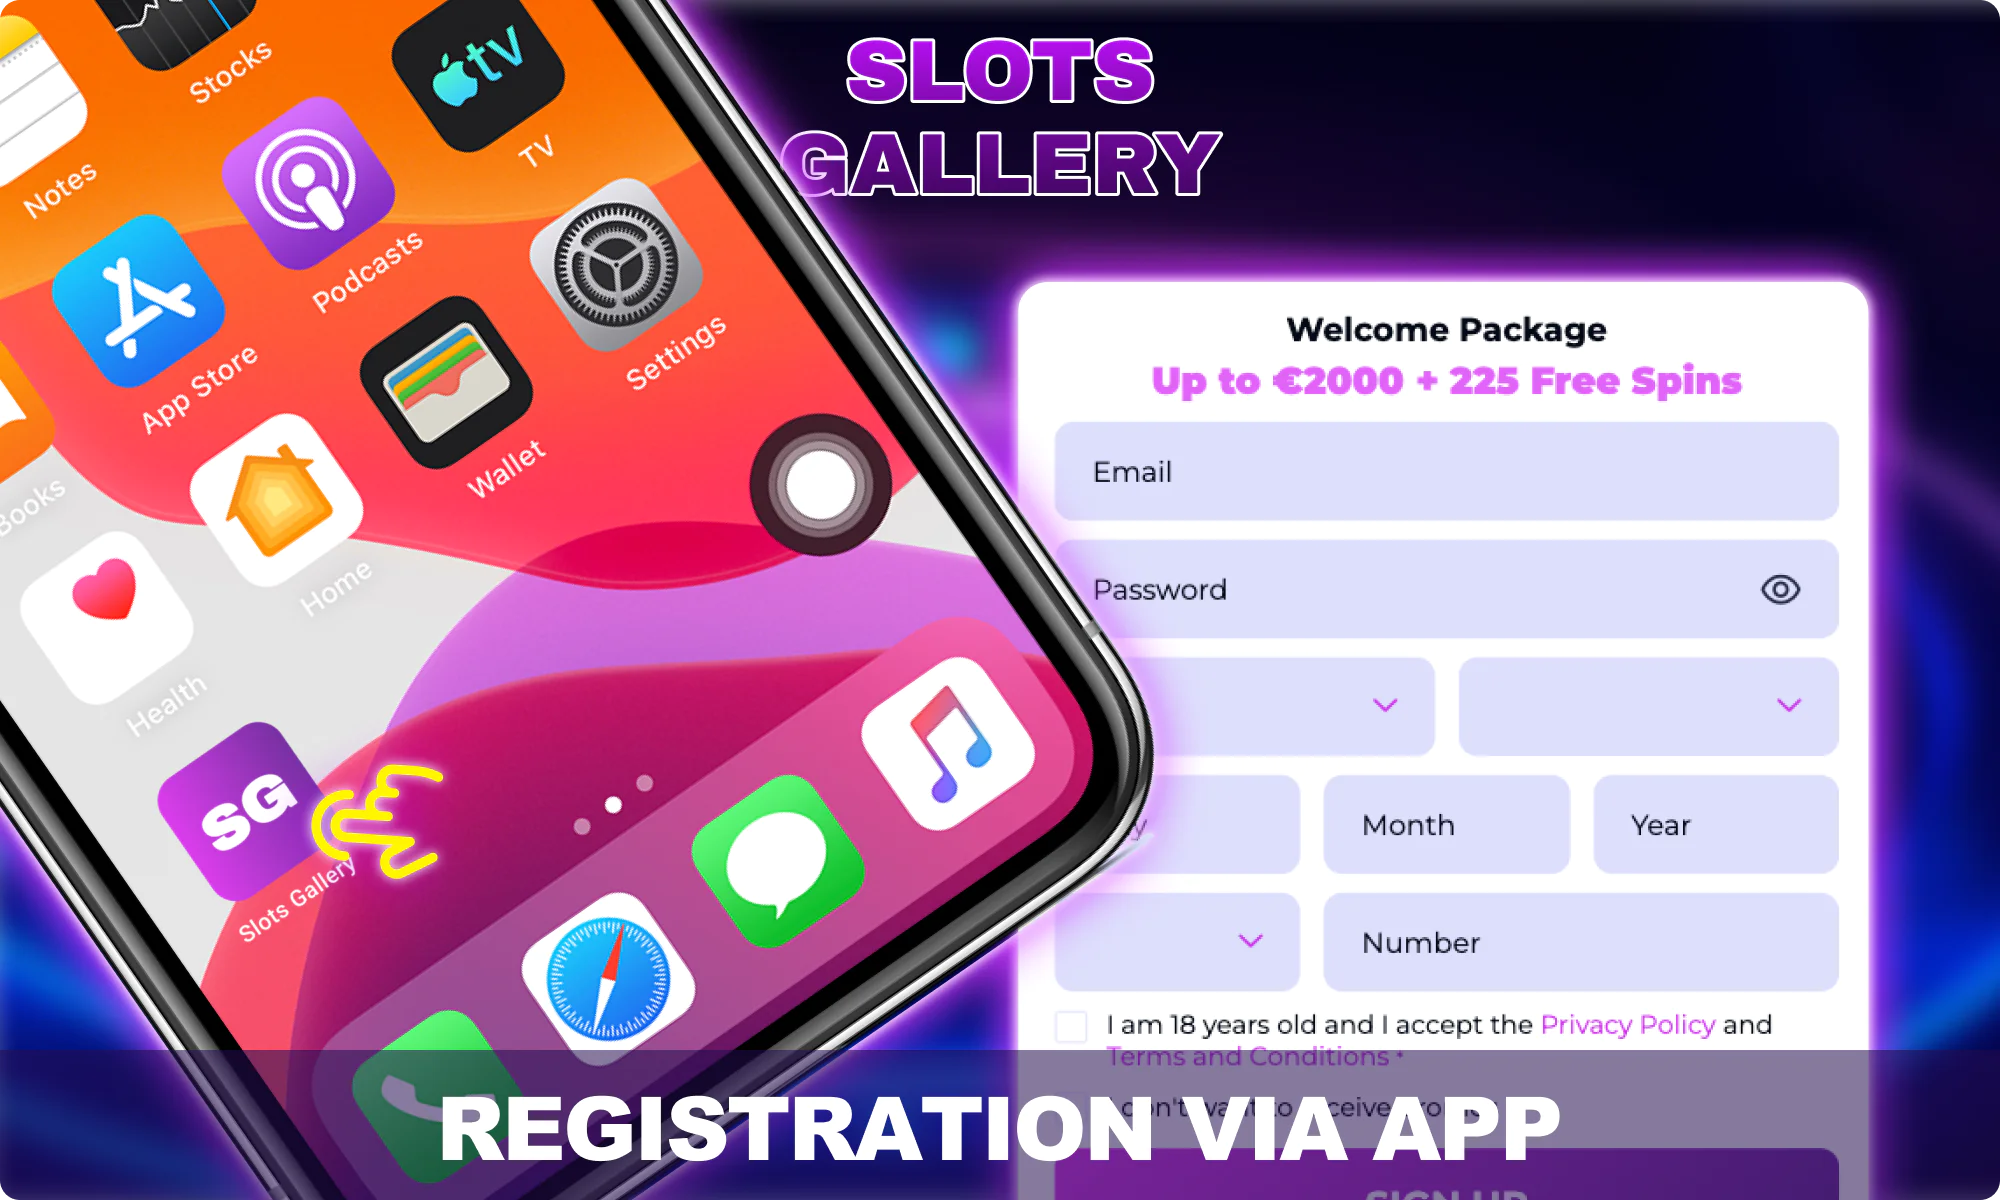 How players from Australia can register at Slots Gallery via Mobile App